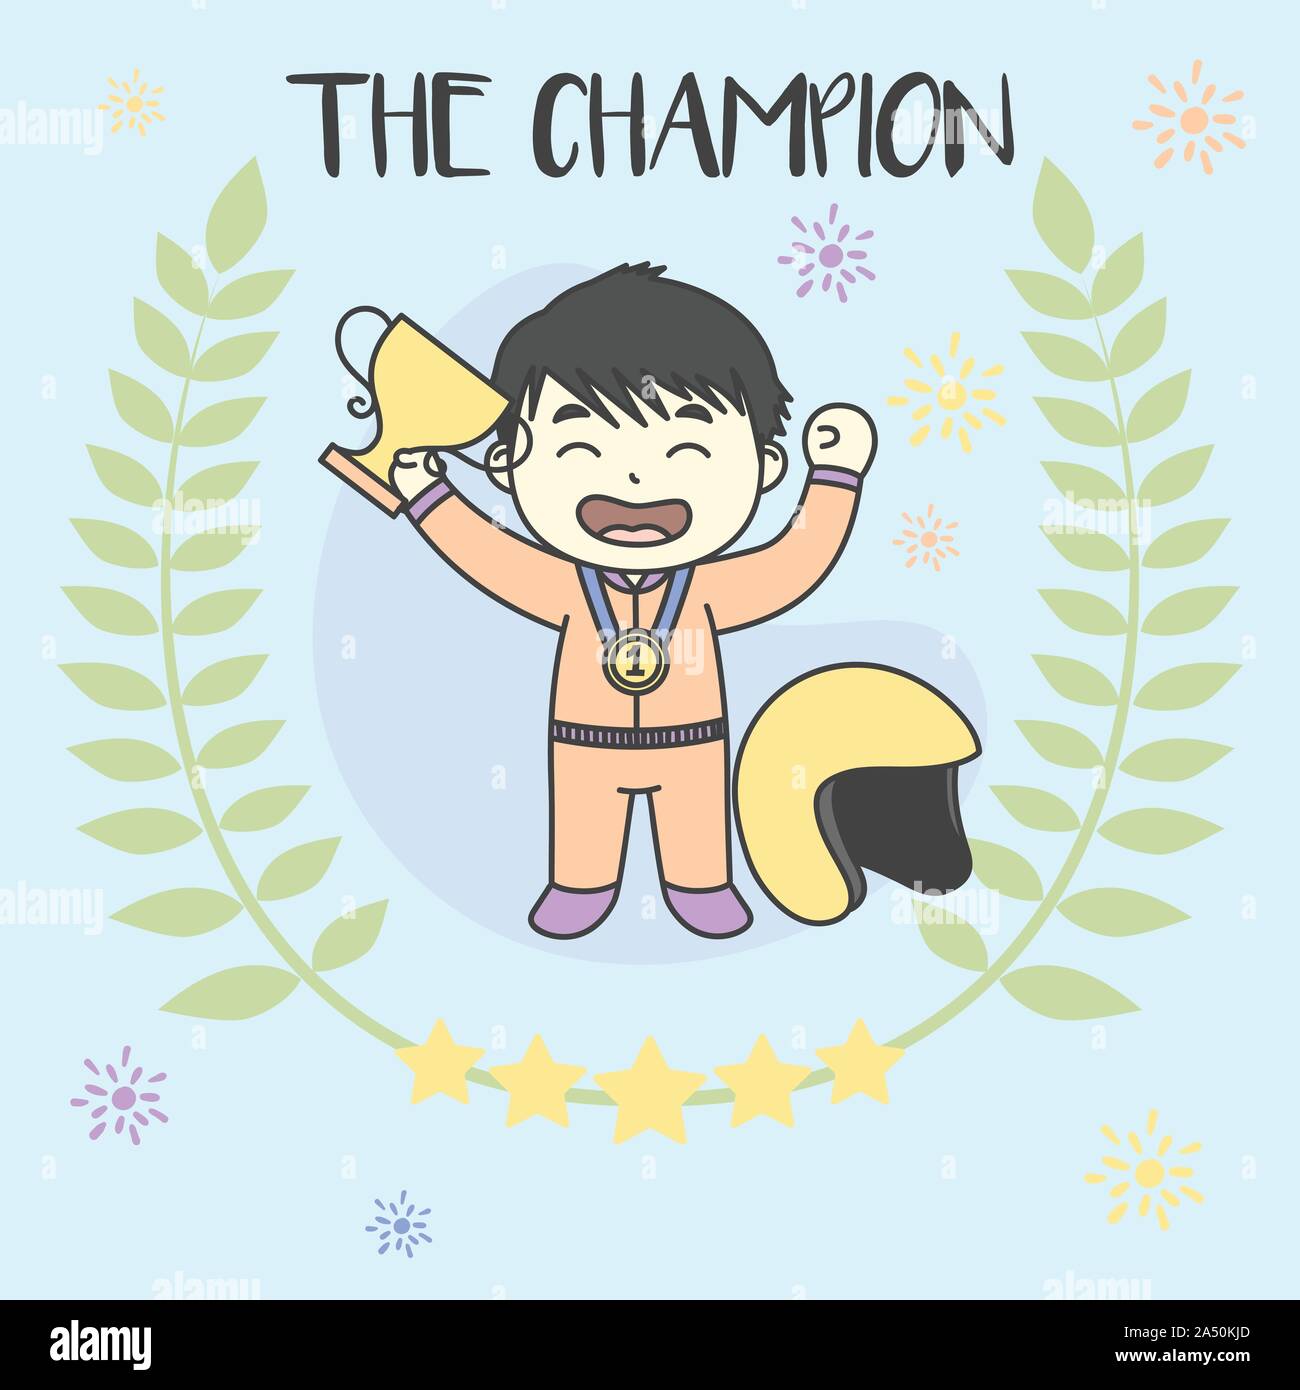 Kid The Champion Get Medals Win the racing. Vector illustration Stock Vector